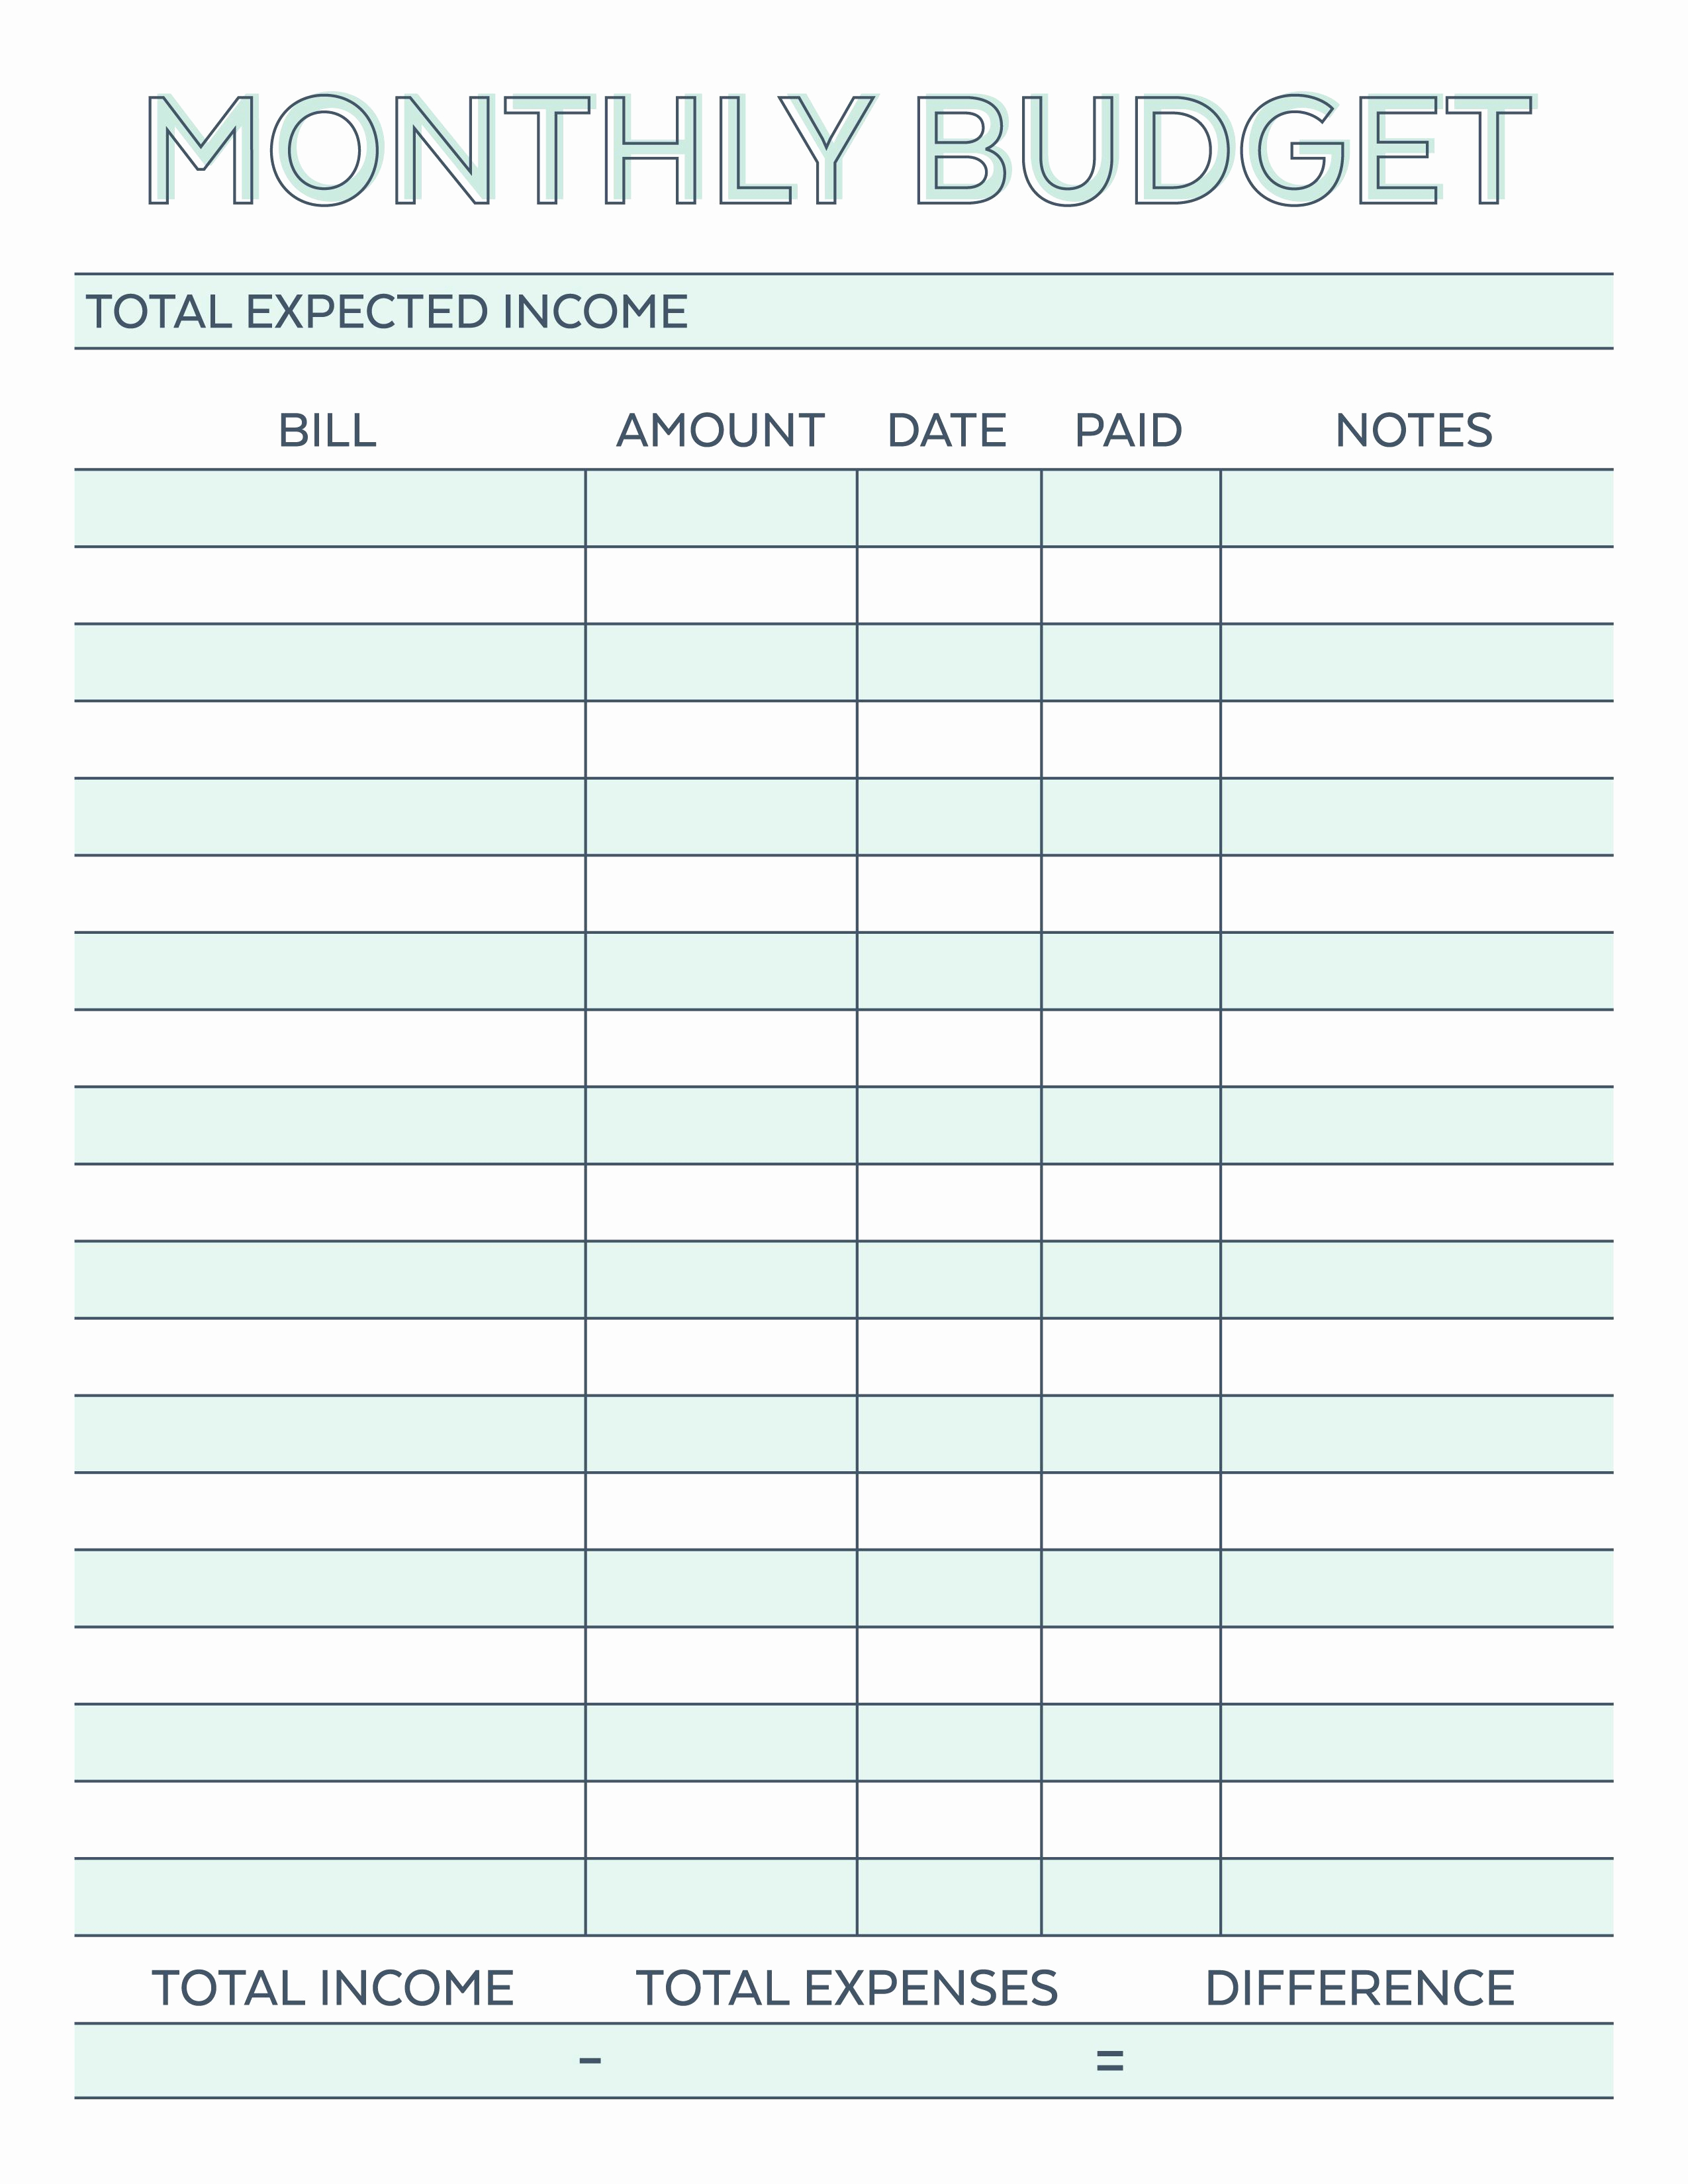 Monthly Budget Worksheet Excel Inspirational Pin by Melody Vliem On Printables